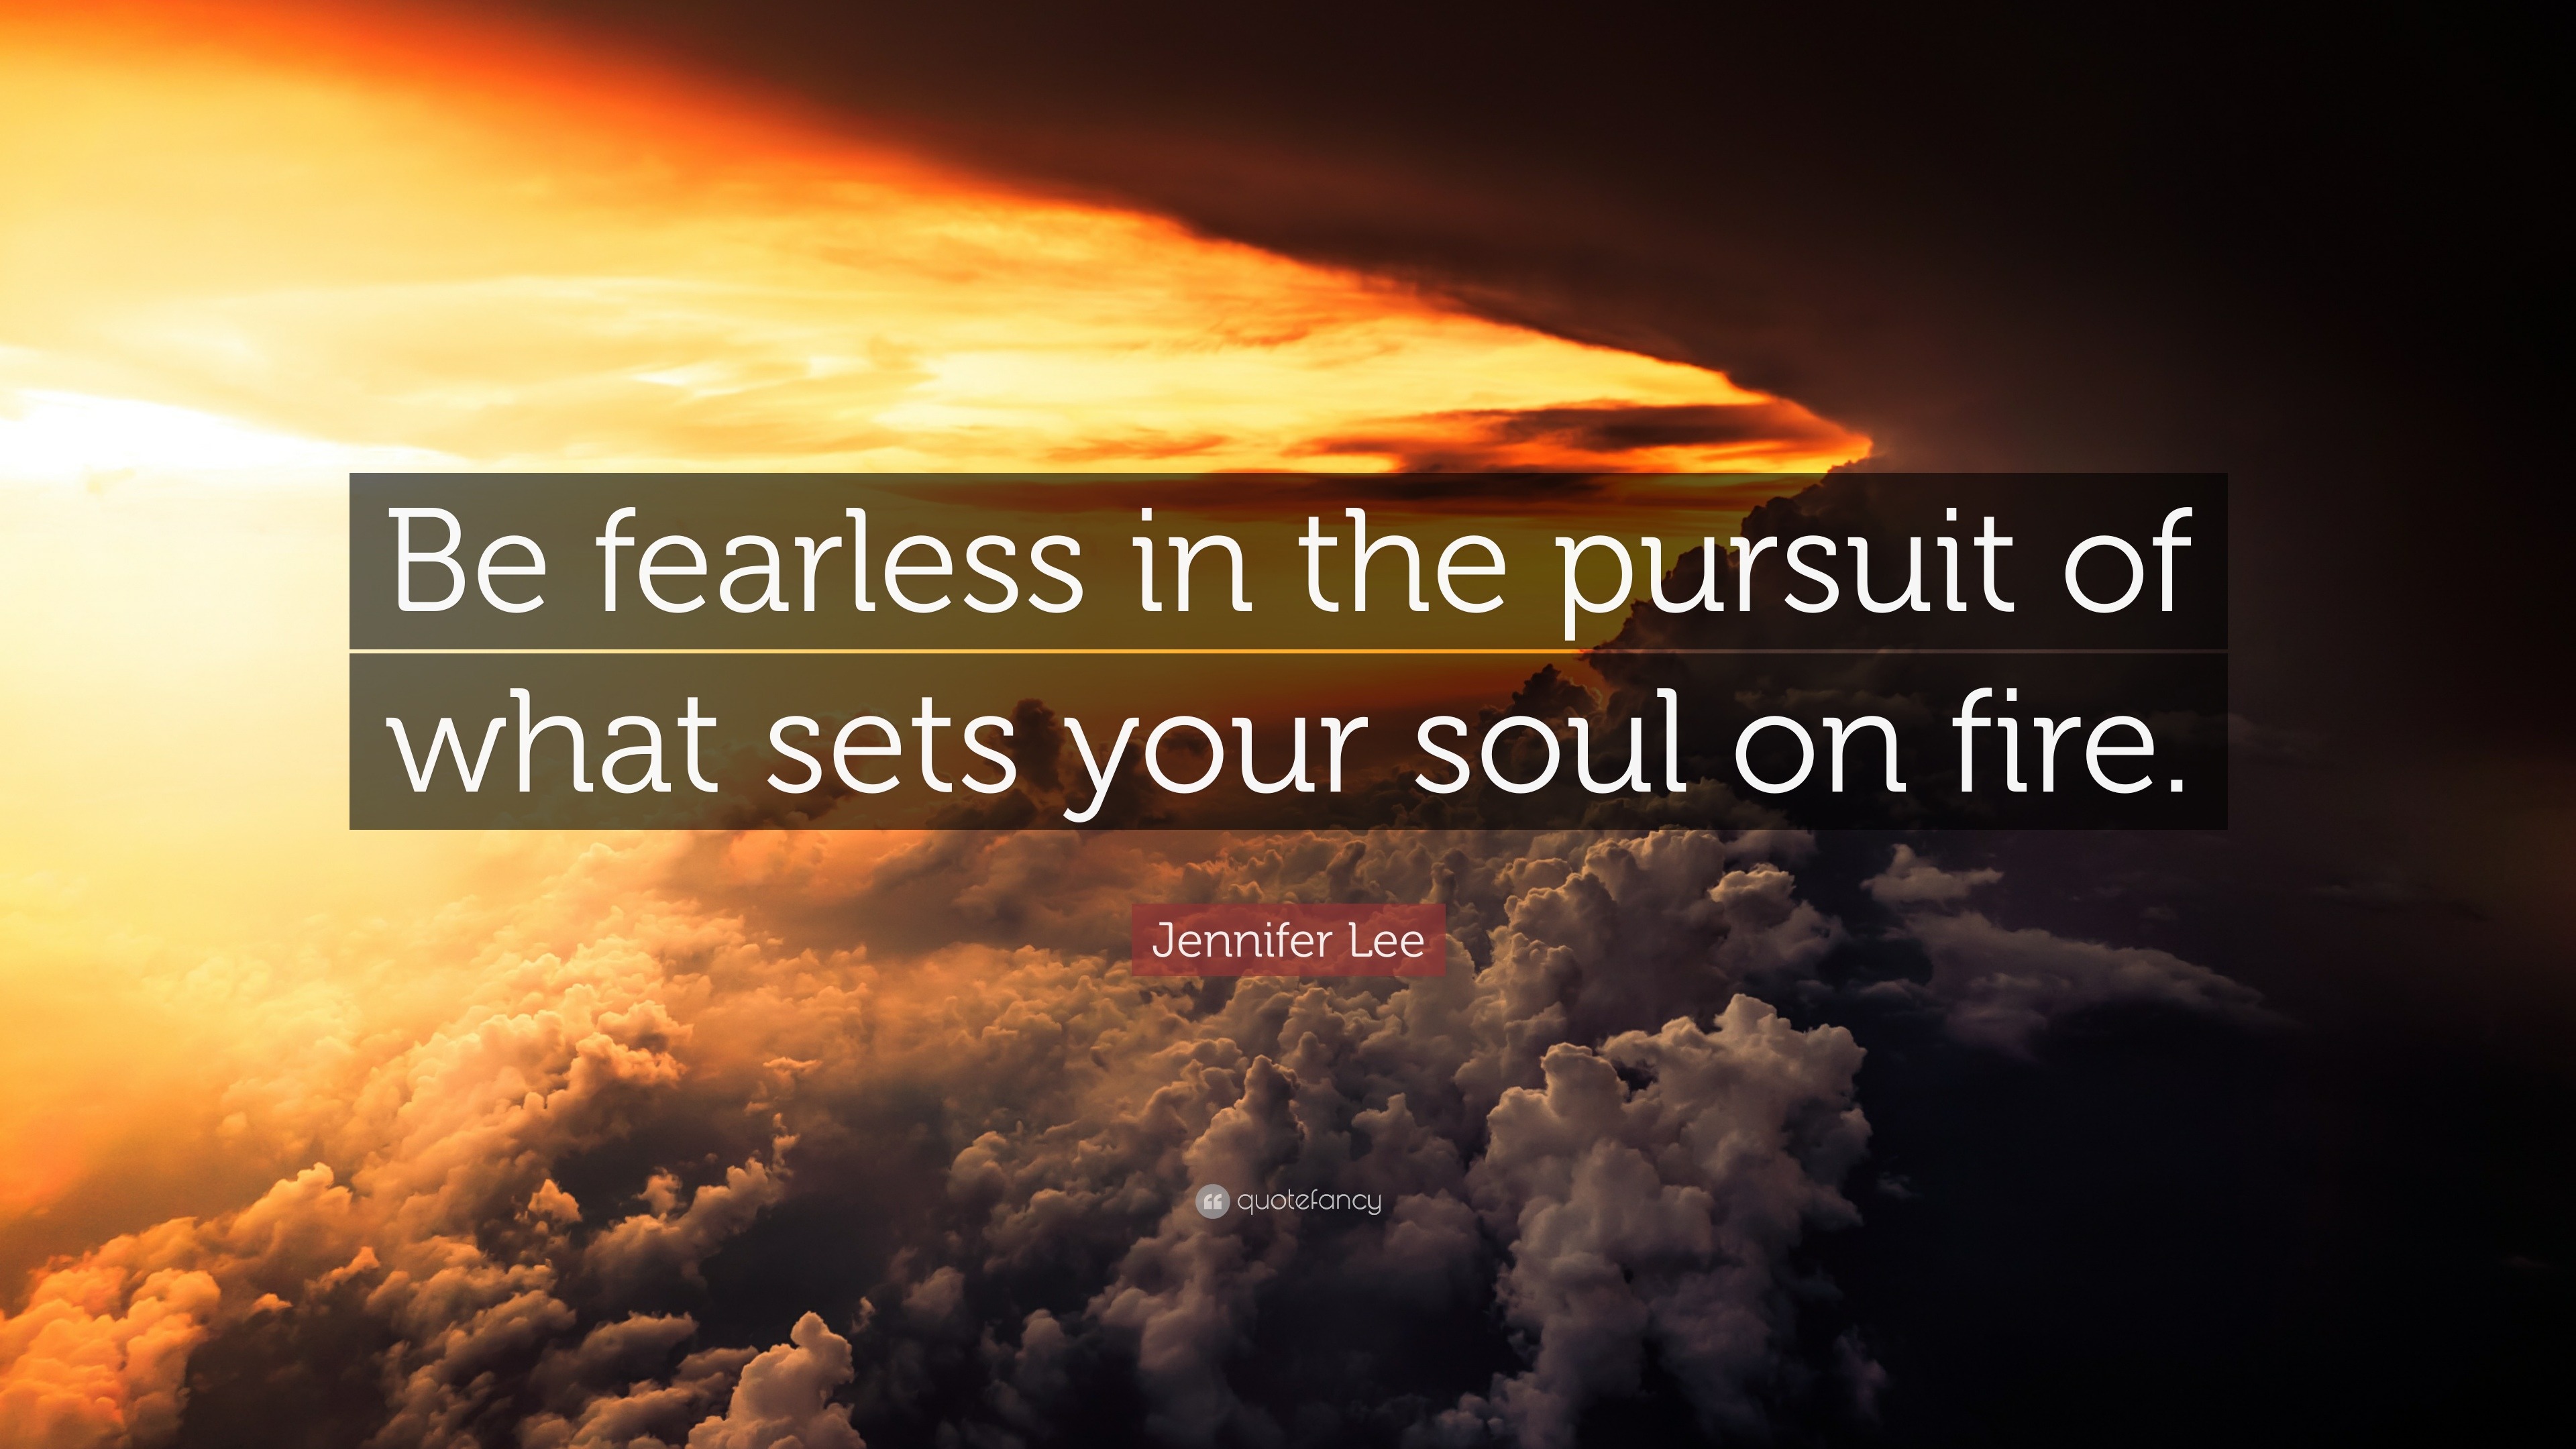 Jennifer Lee Quote: “Be fearless in the pursuit of what sets your